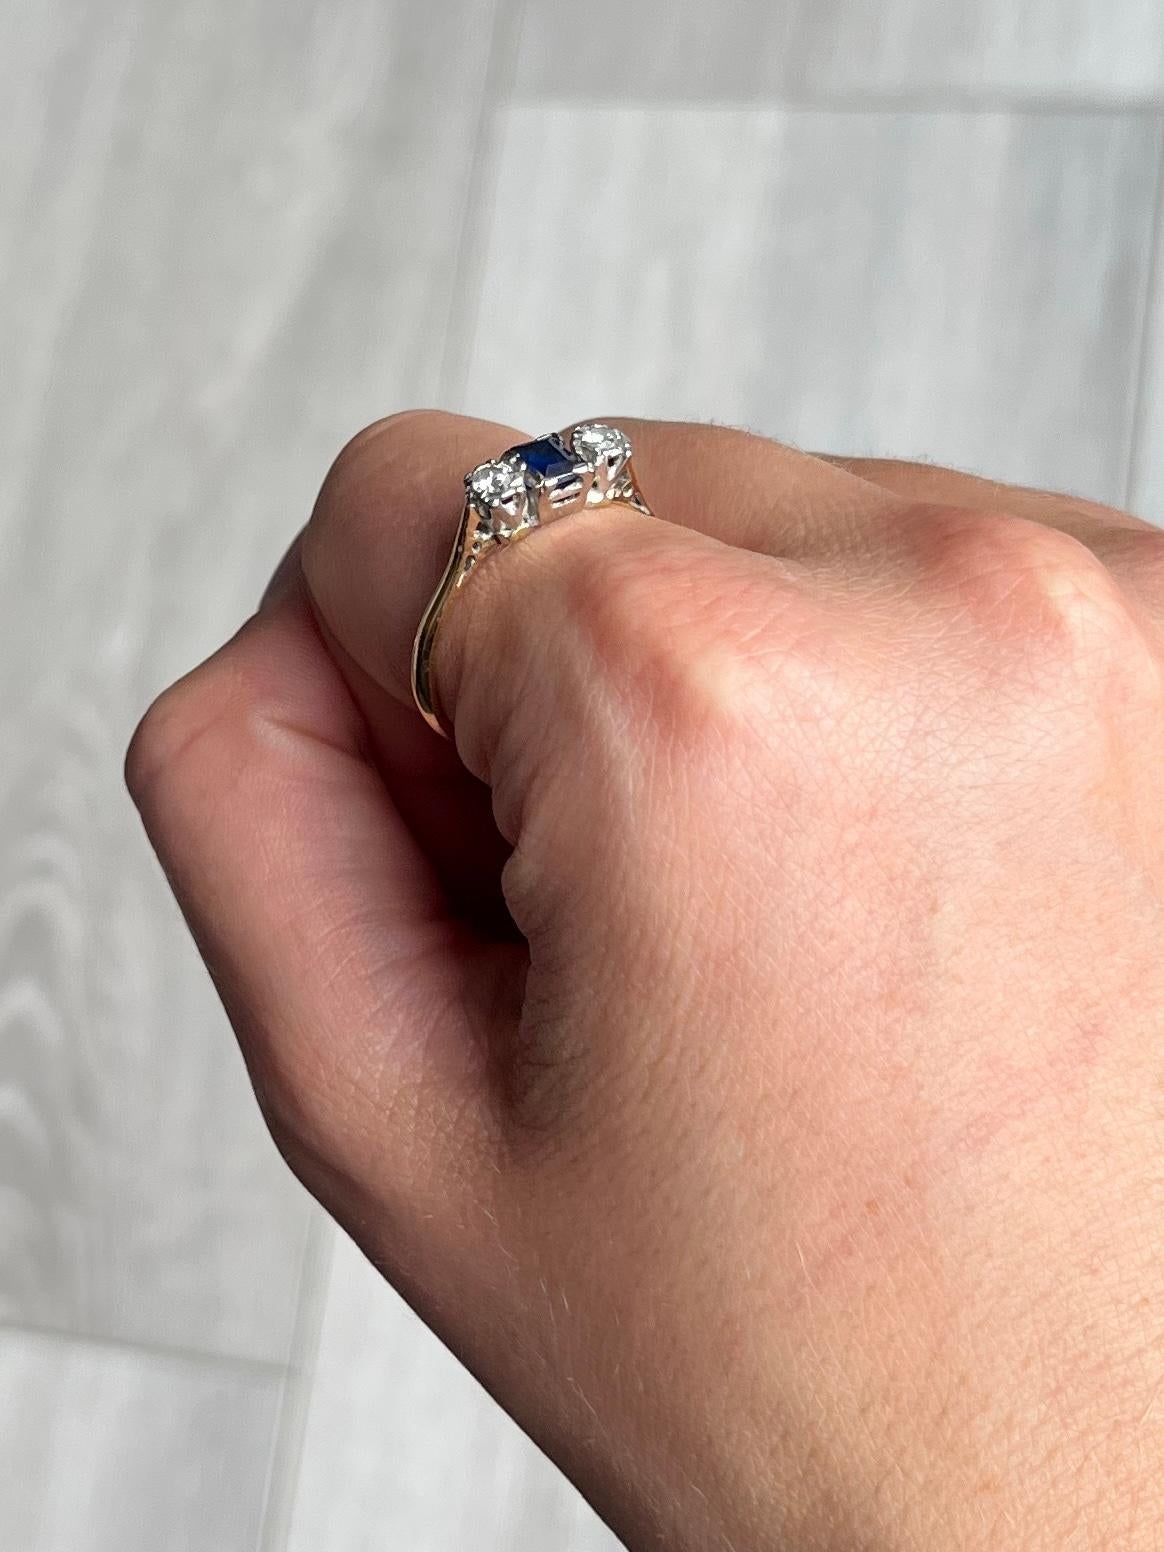 This classic three stone ring holds an emerald cut sapphire measuring 15pts at the centre and ether side there is a shimmering round cut diamonds measuring 15pts each. Modelled in 18ct gold.

Ring Size: T or 9 1/2 